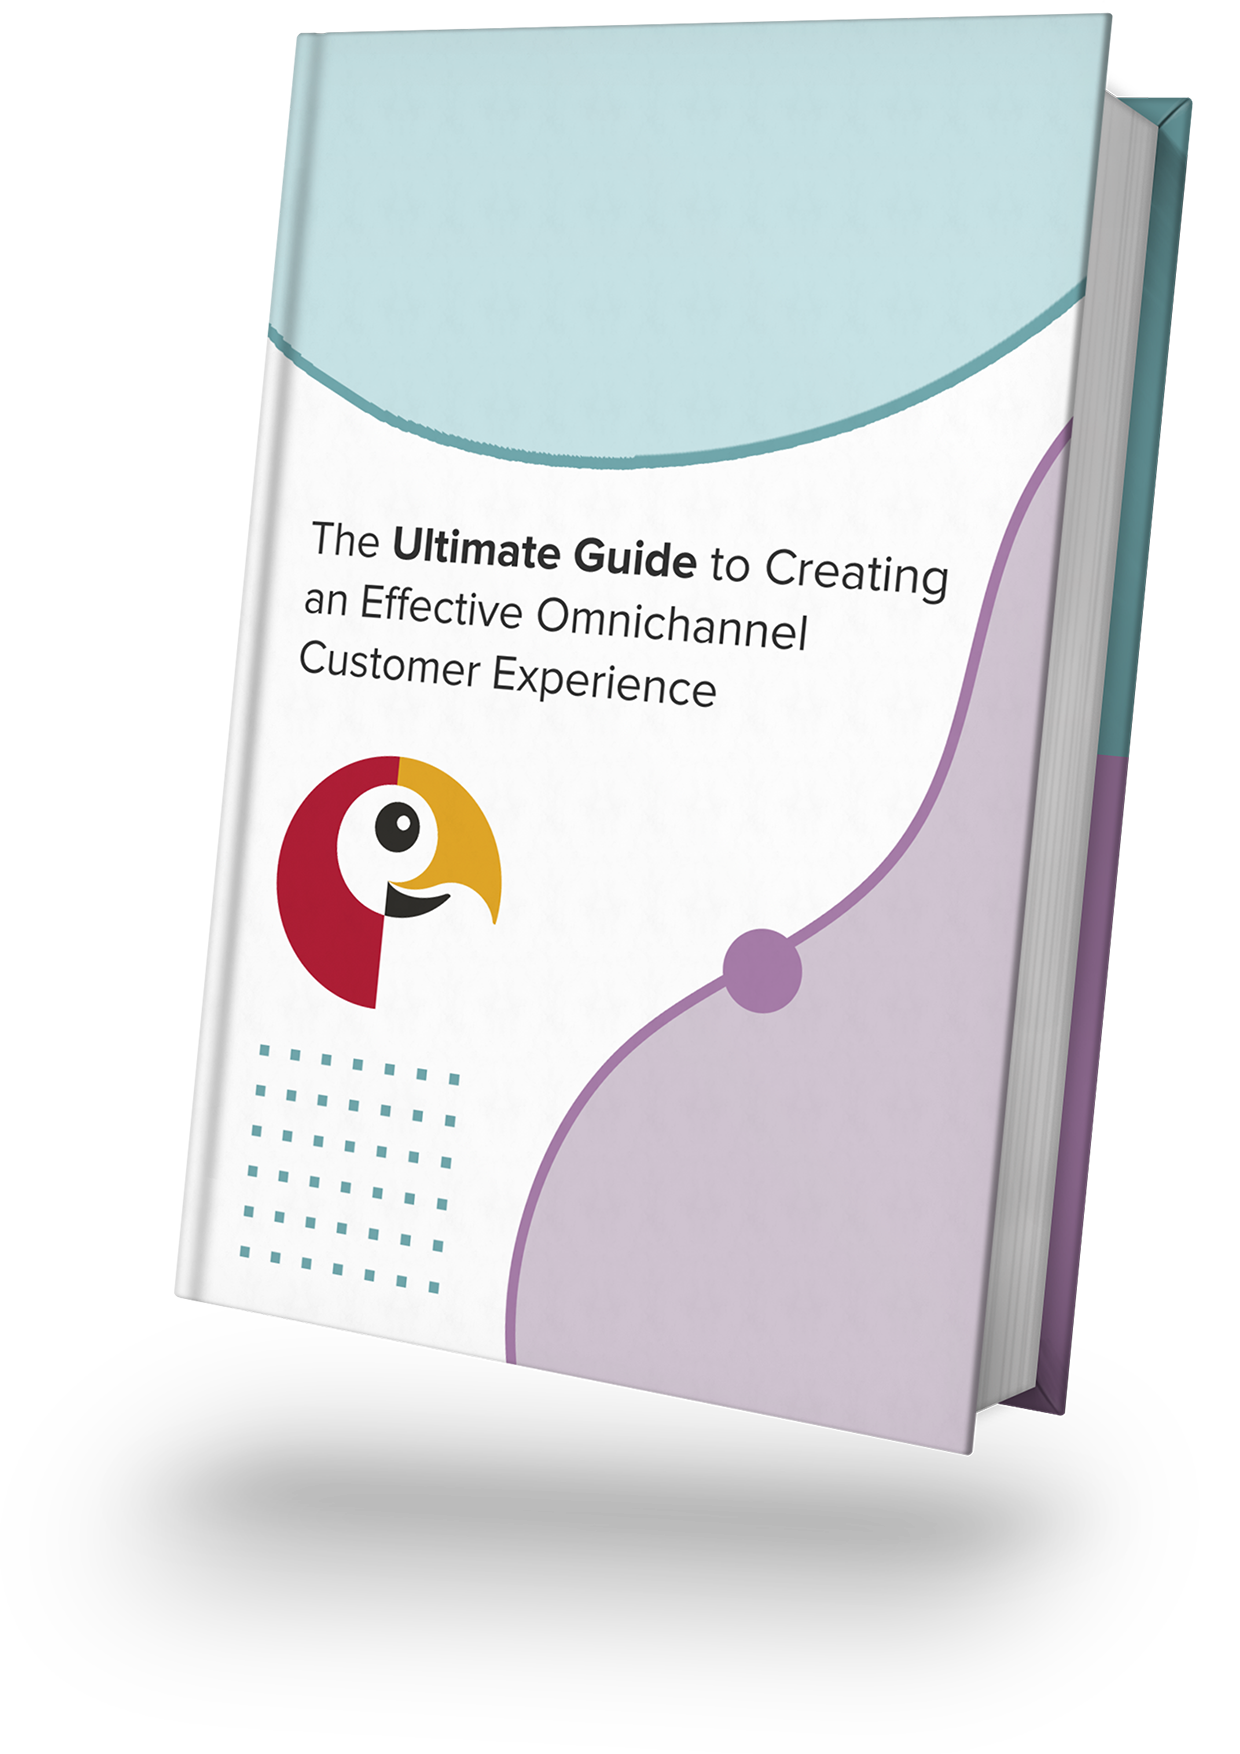 The Ultimate Guide to Creating an Effective Omnichannel Customer Experience book